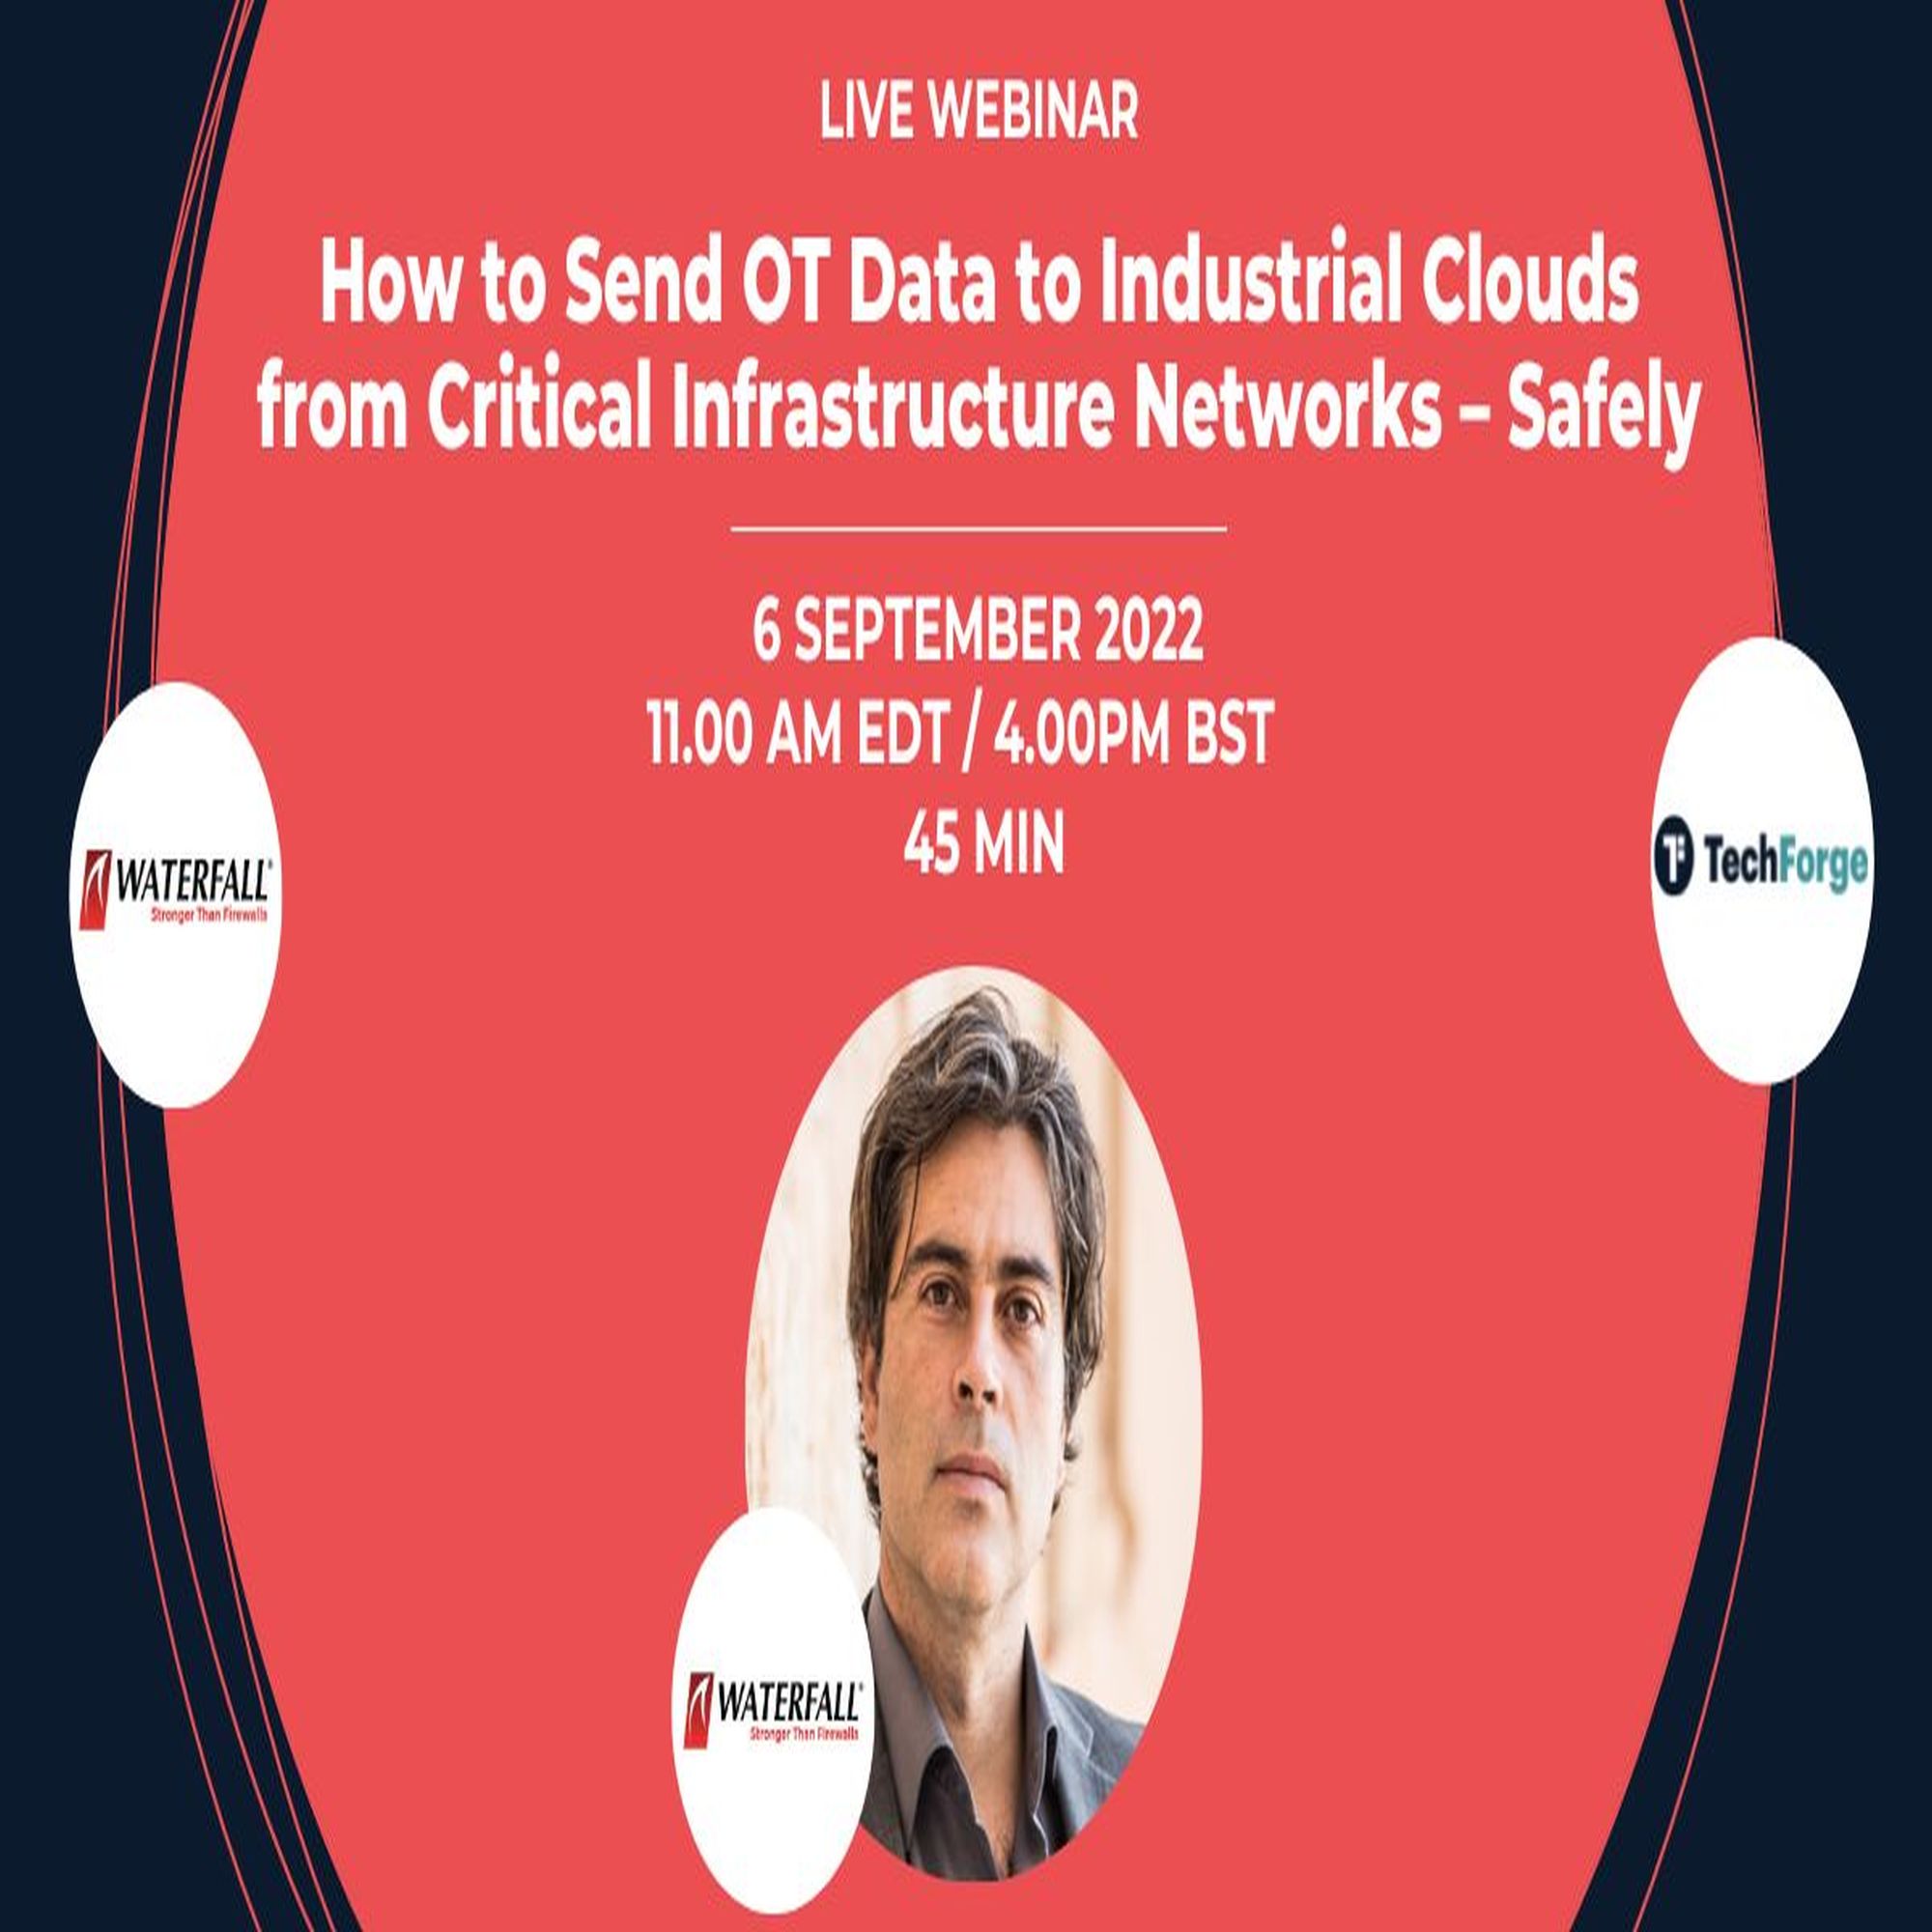 Webinar - How to Send OT Data to Industrial Clouds from Critical Infrastructure Networks - Safely, Online Event